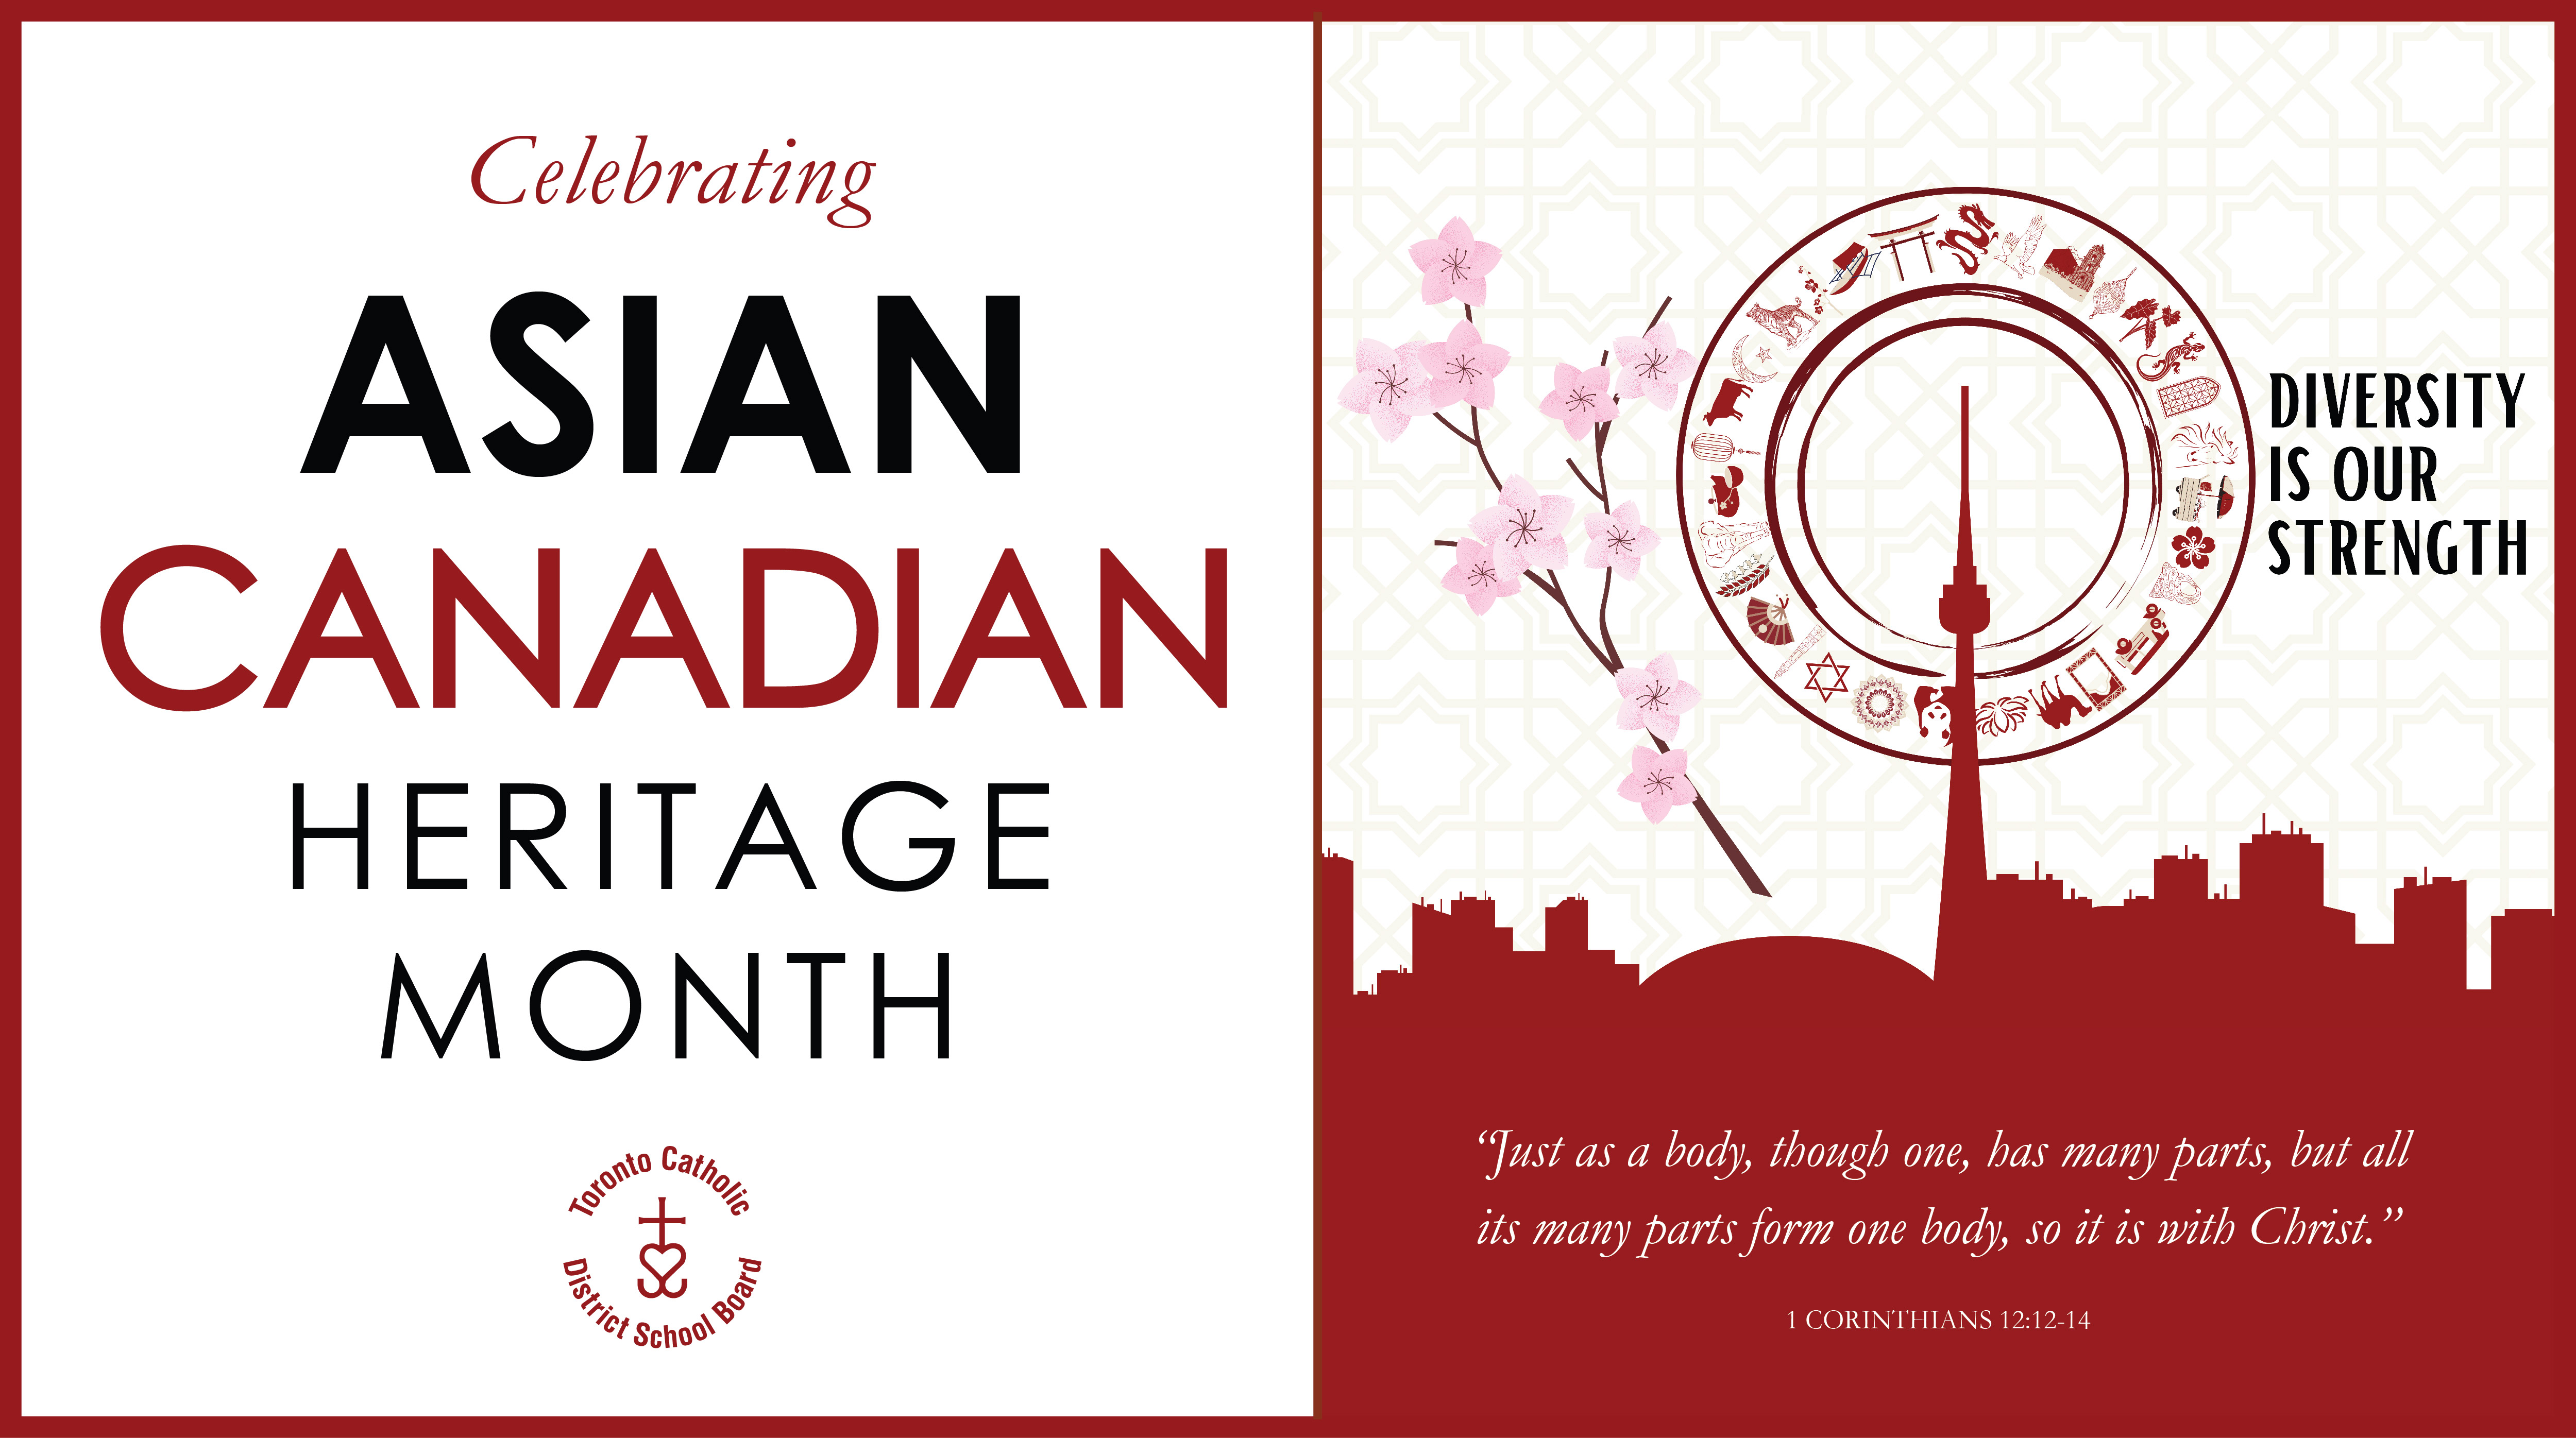 Banner for Asian Canadian Heritage Month. On the left are the words "Celebrating ASIAN CANADIAN HERITAGE MONTH" with the circular TCDSB logo under it. On the right is a graphic showing a red silhouette of the Toronto skyline, with a circular border around the CN tower. Circling the border are drawn different symbols of Asia: a pagoda, a dragon, a salamander, a cherry blossom flower, a camel, a lotus flower, a panda, a Magen David, a hand fan, an elephant, a cow, the Crescent and Star, a tiger, and more. On the left side of the graphic is a cherry blossom branch with pink petals. On the right are the words "DIVERSITY IS OUR STRENGTH." Near the bottom of the graphic is the Bible quote "Just as a body, though one, has many parts, but all its many parts form one body, so it is with Christ." - 1 Corinthians 12:12-14